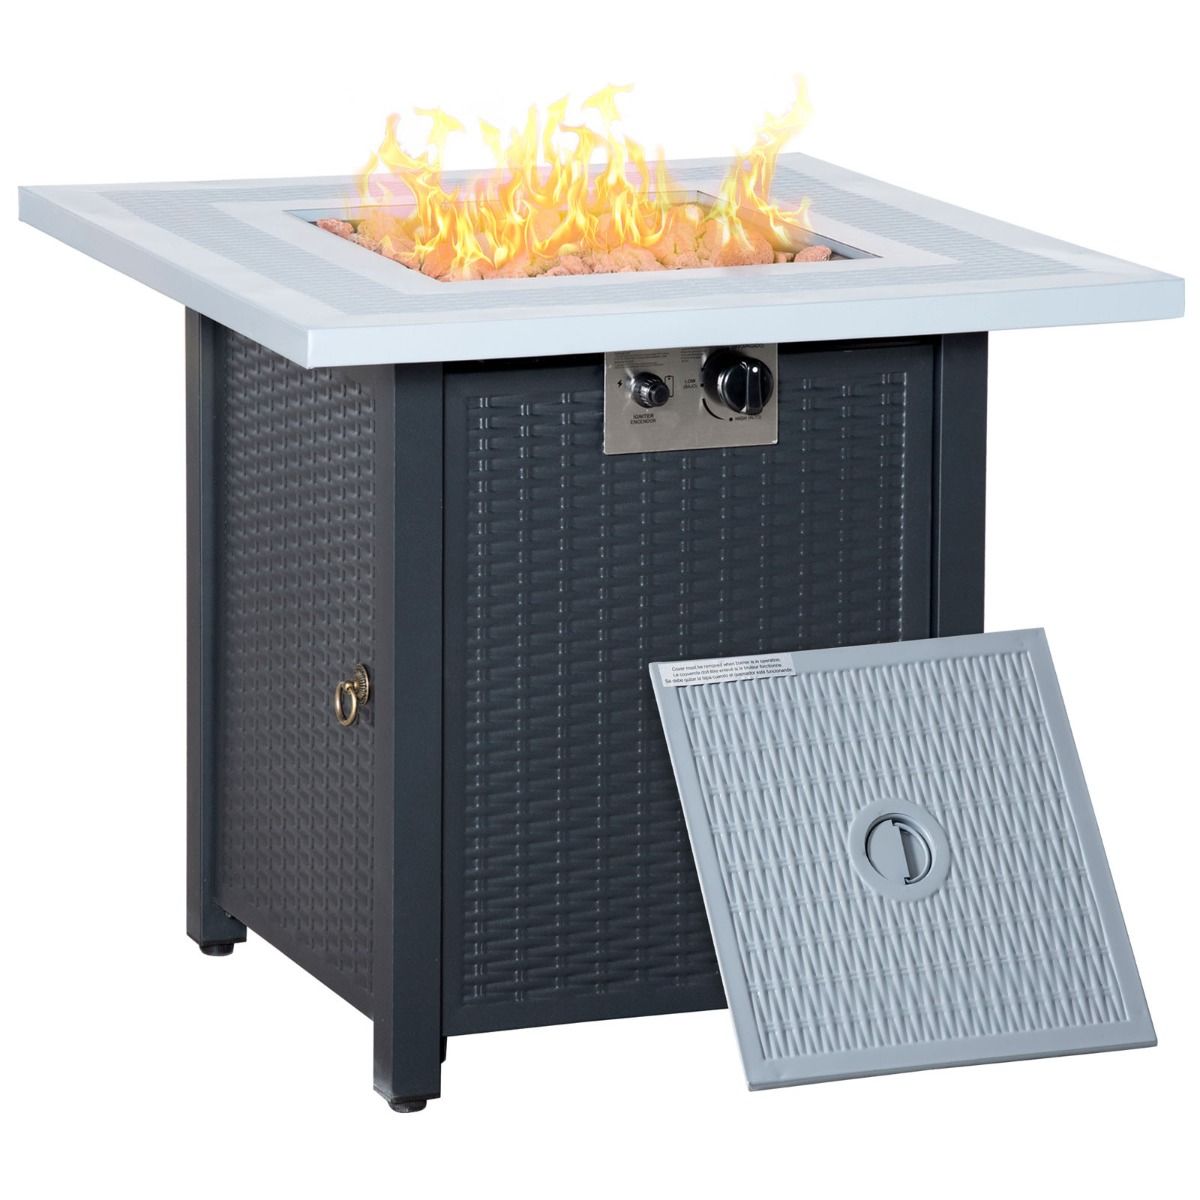 Outsunny Square Propane Gas Fire Pit Table - Black/Grey